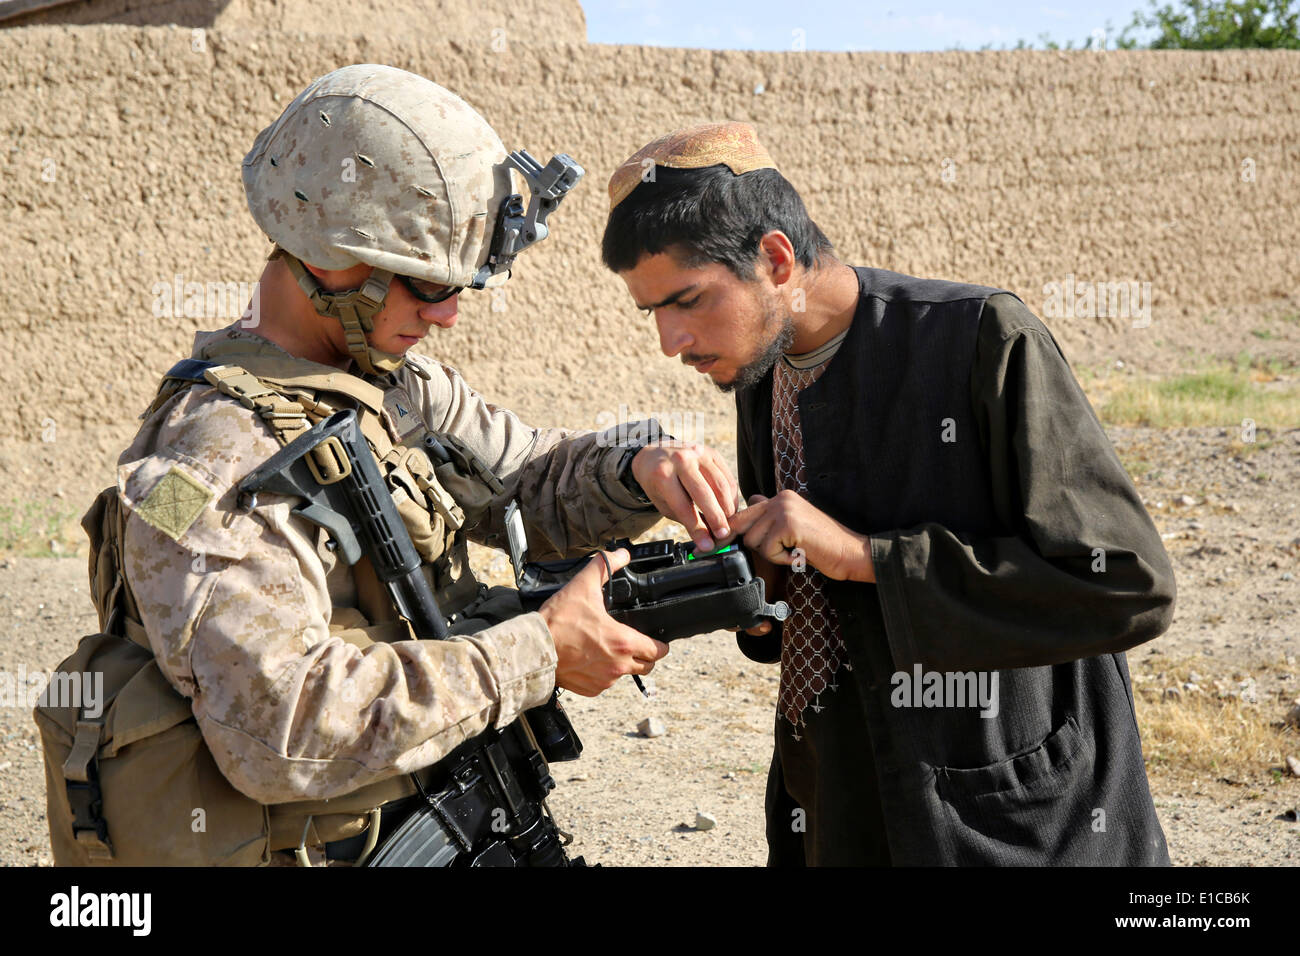 A US Marine with the 1st Battalion, 7th Marine Regiment, uses a Biometric Enrollment and Screening Device on a villager during a counter-insurgency mission May 15, 2014 in Larr Village, Helmand province, Afghanistan. Stock Photo